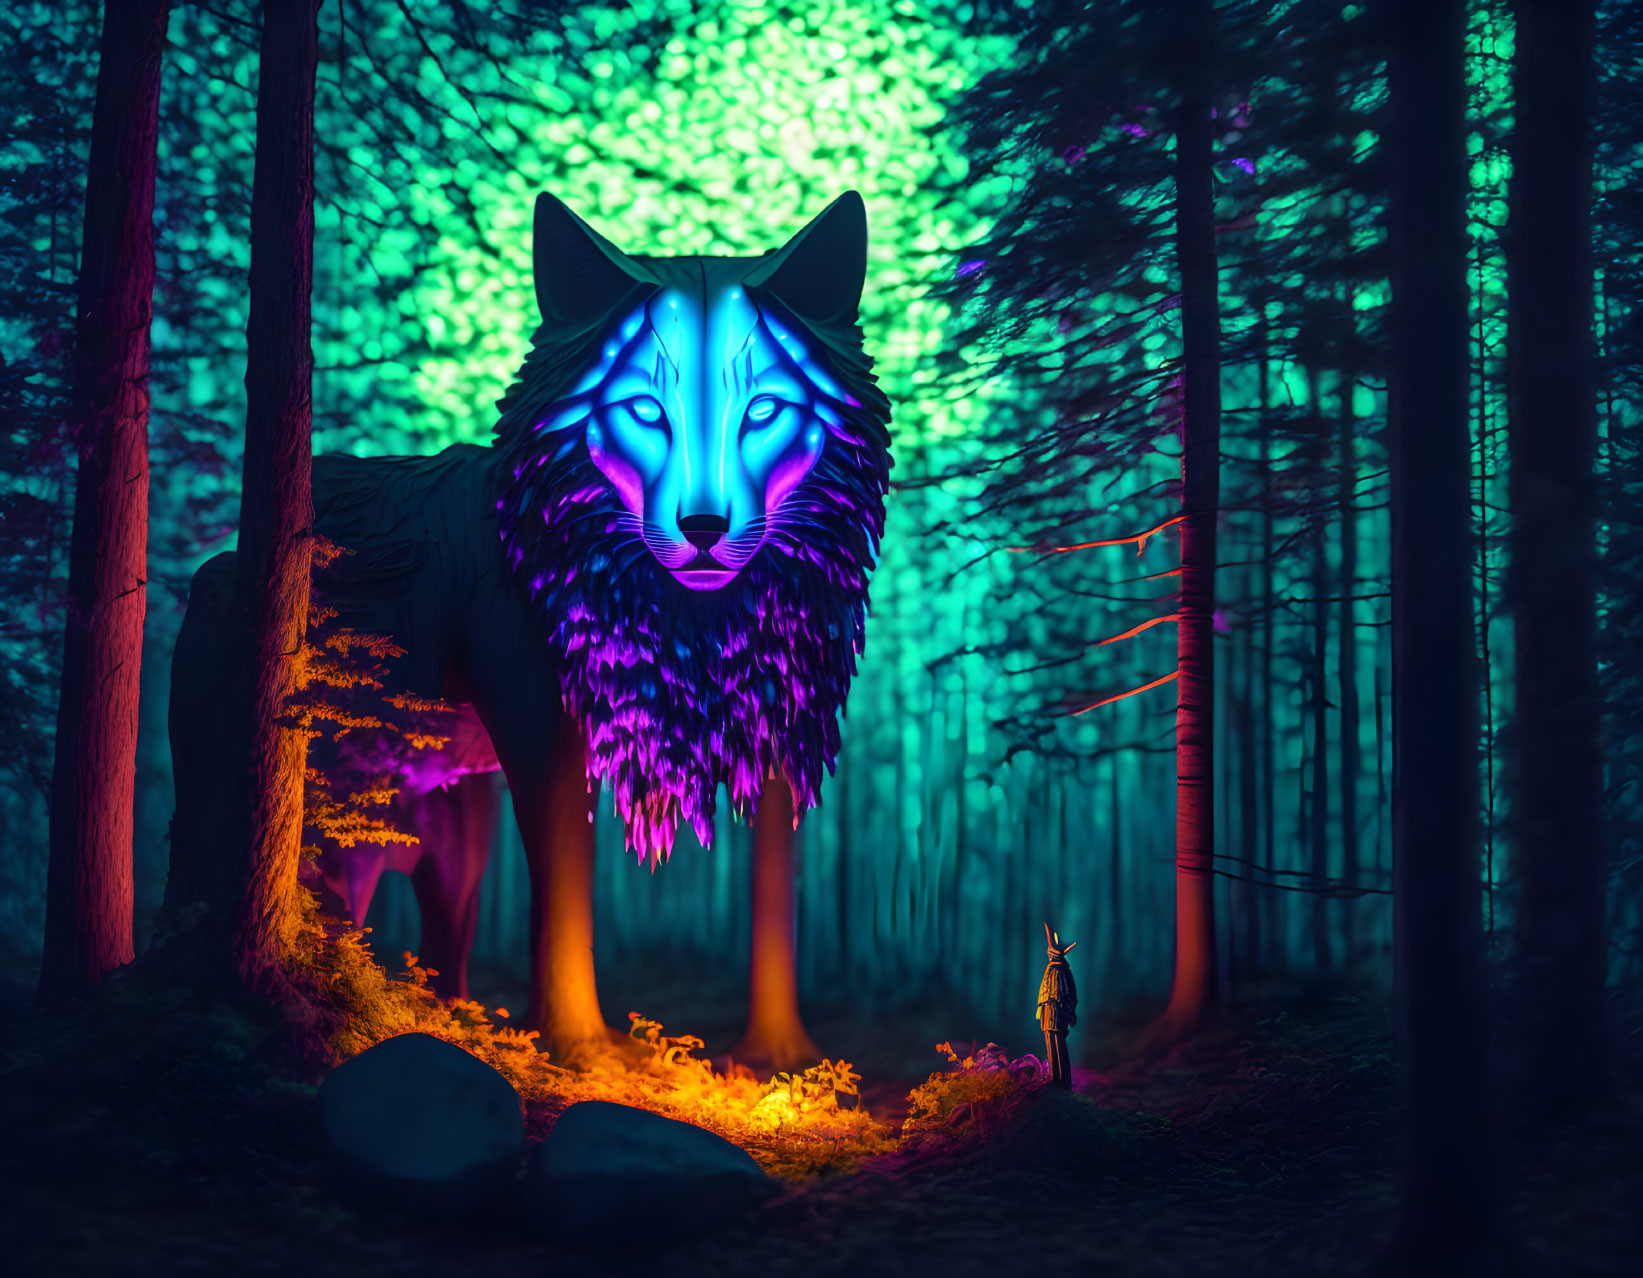 Luminescent multicolored wolf in mystical forest with neon figure